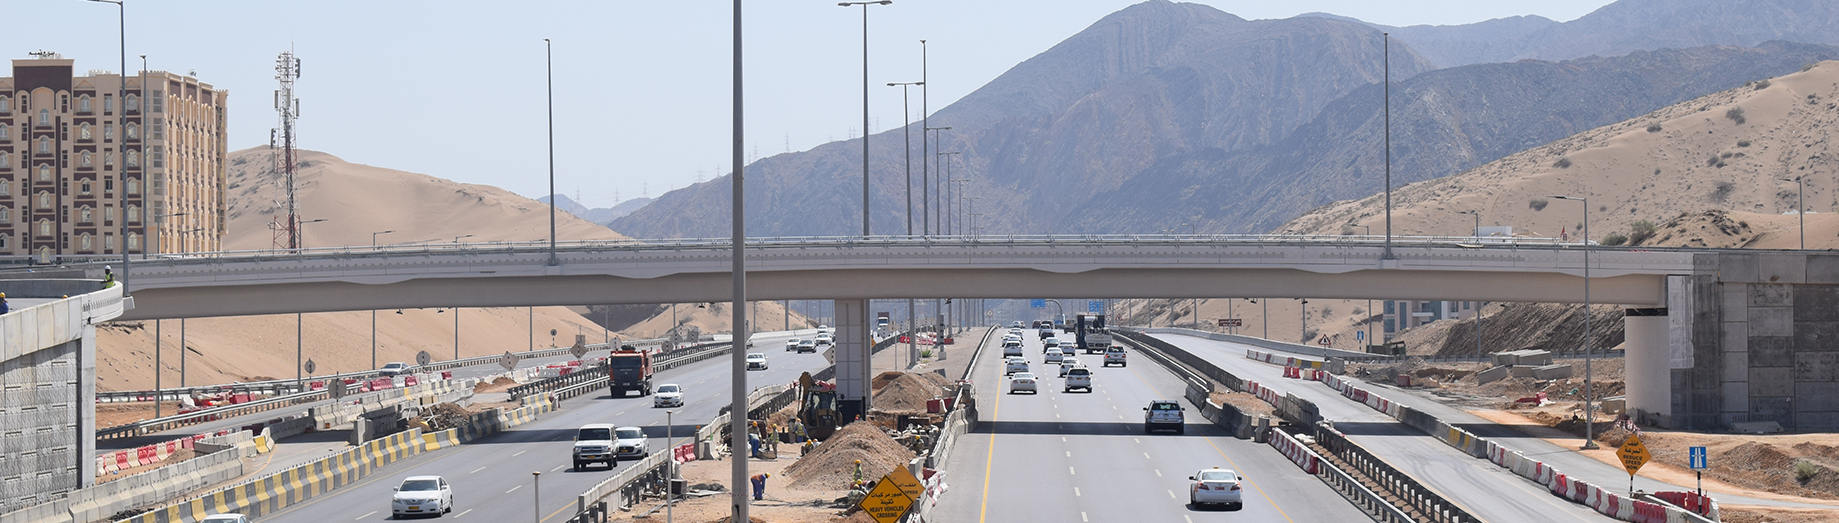 Mall of Oman-Enabling and Highway works